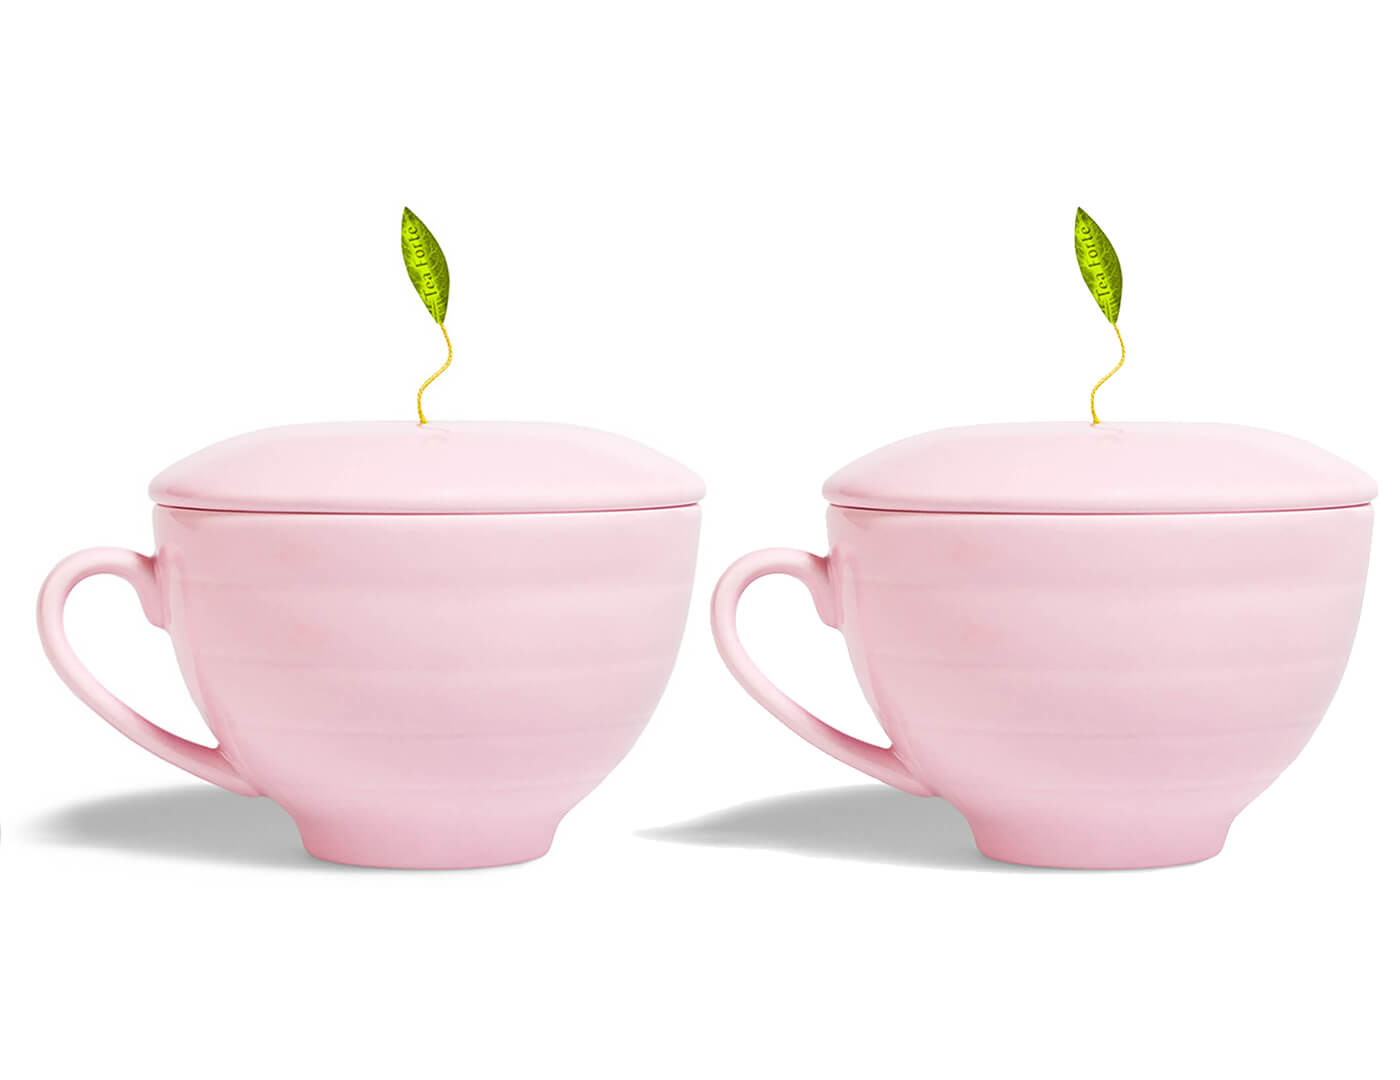 Two Pink Café Cups with lids and tea infuser leaves peeking out of the top of each.